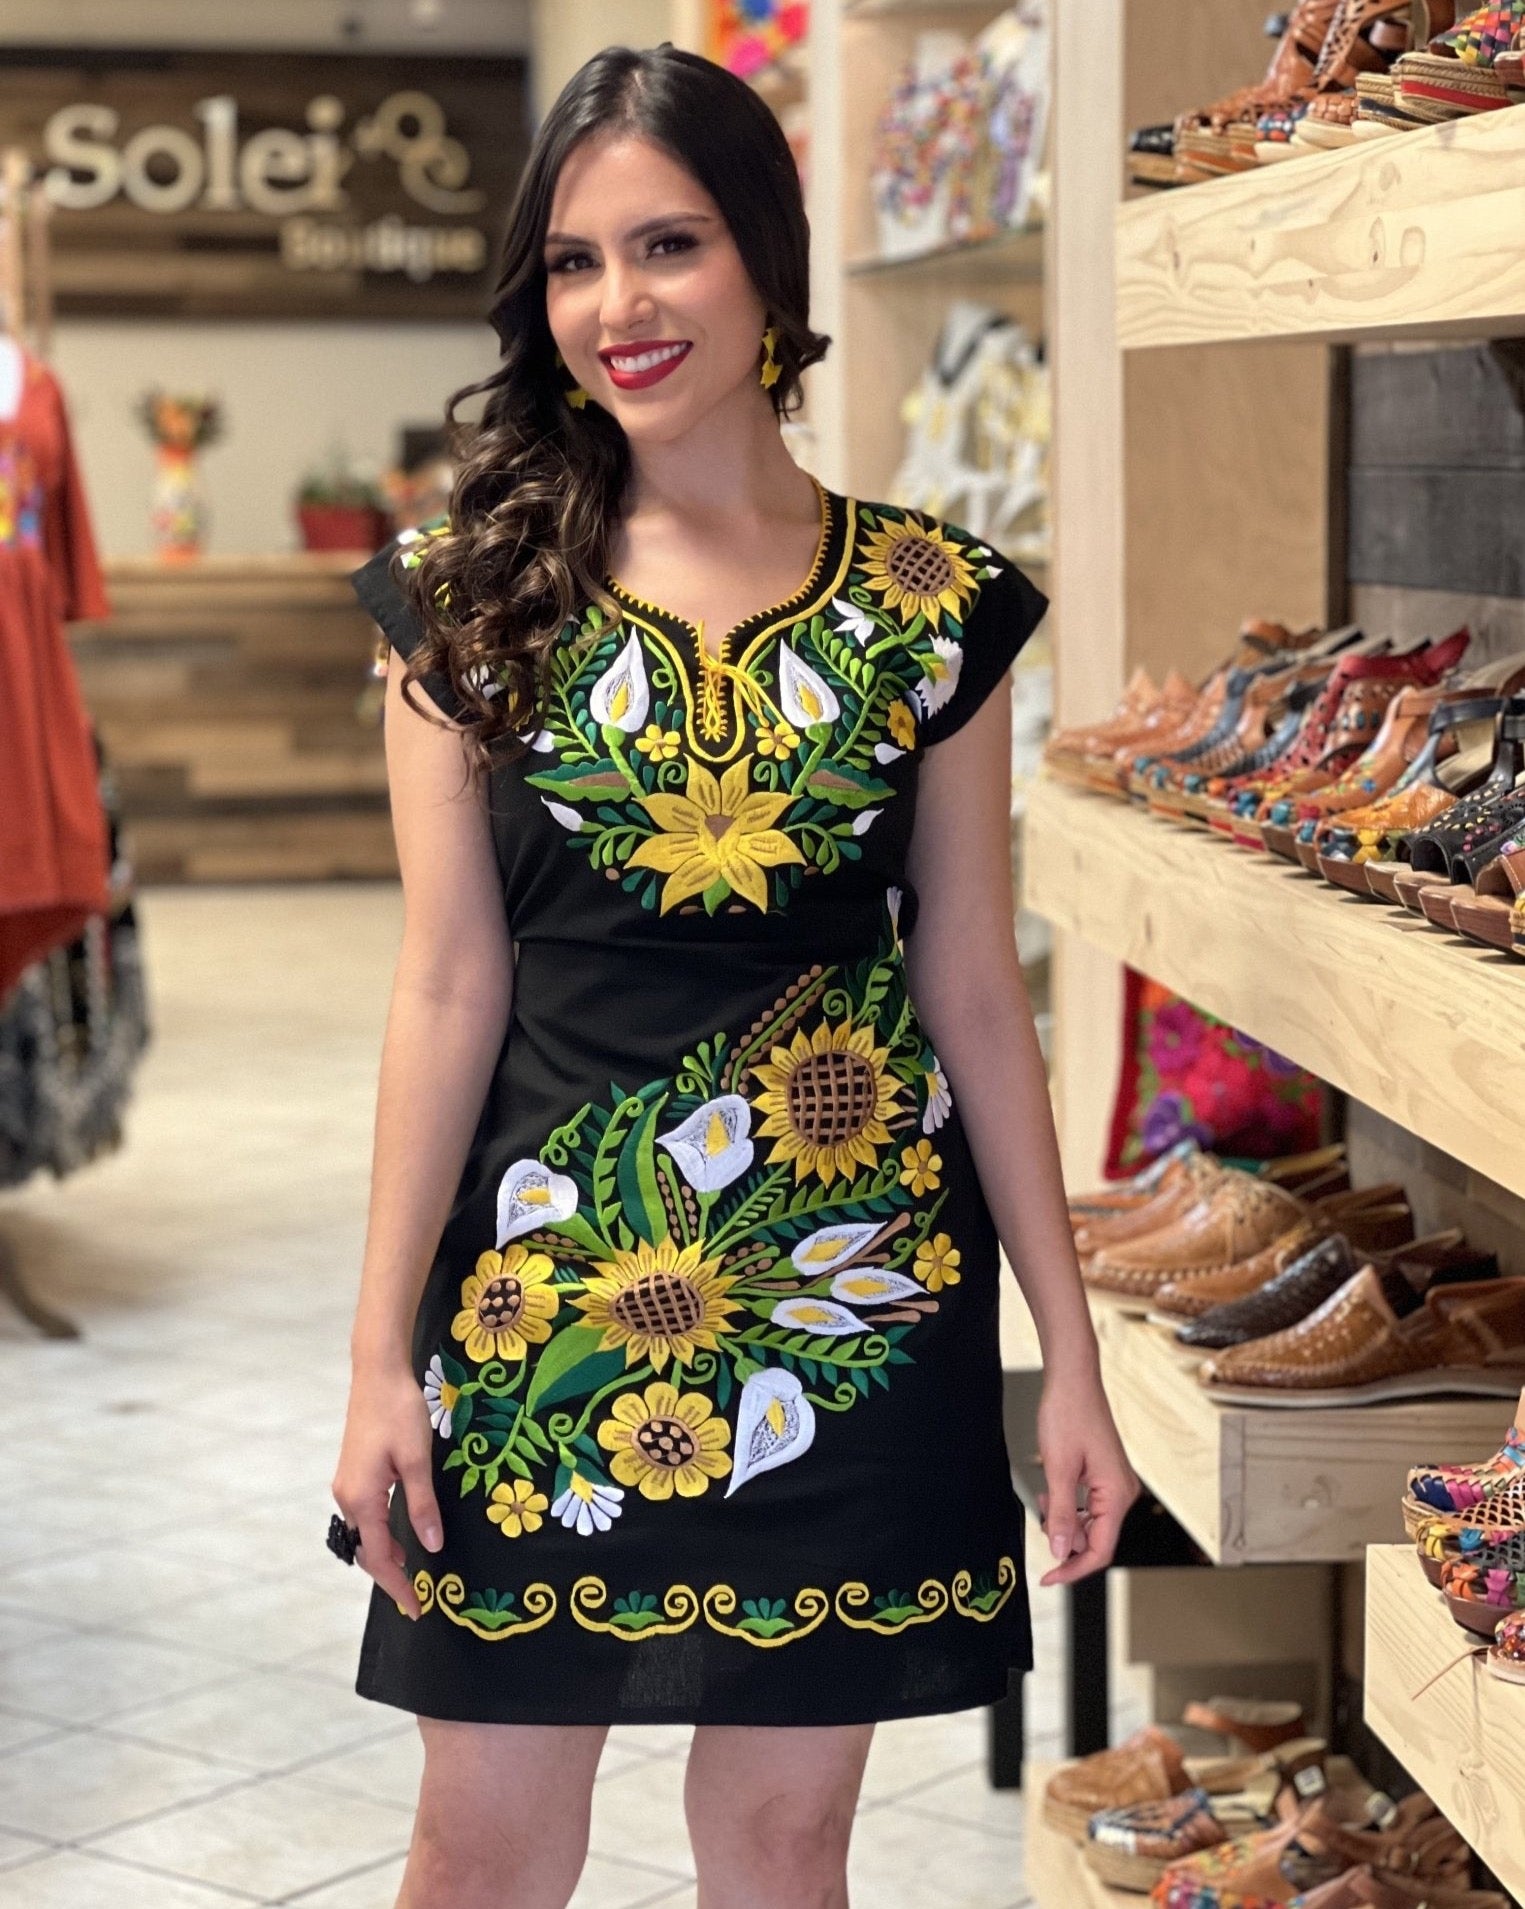 Mexican Sunflower Embroidered Dress. Kimono Guillermina Dress. - Solei Store